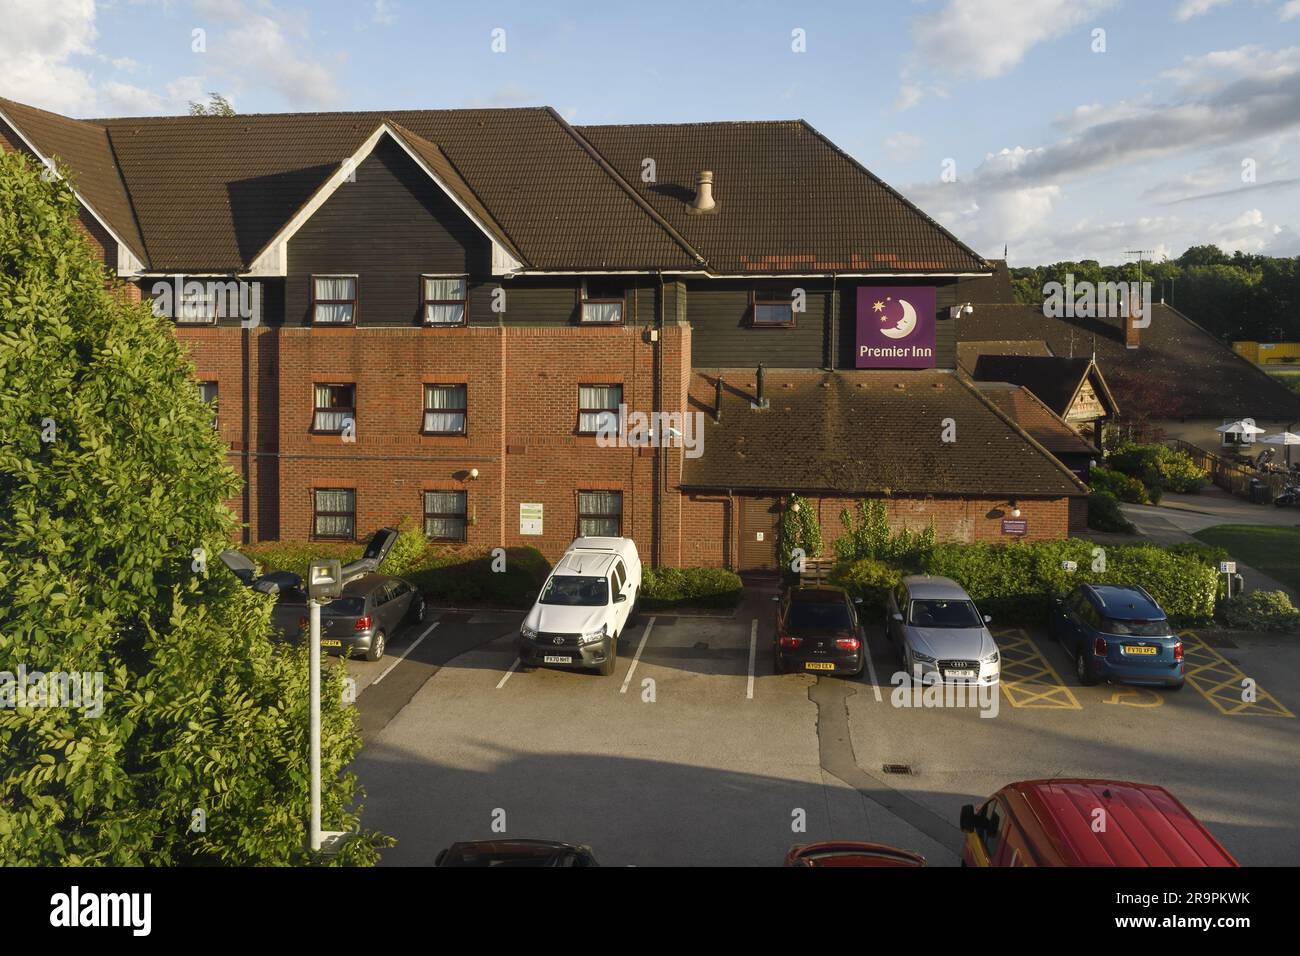 Exterior of a large Premier Inn hotel on the outskirts of Nottingham UK Stock Photo